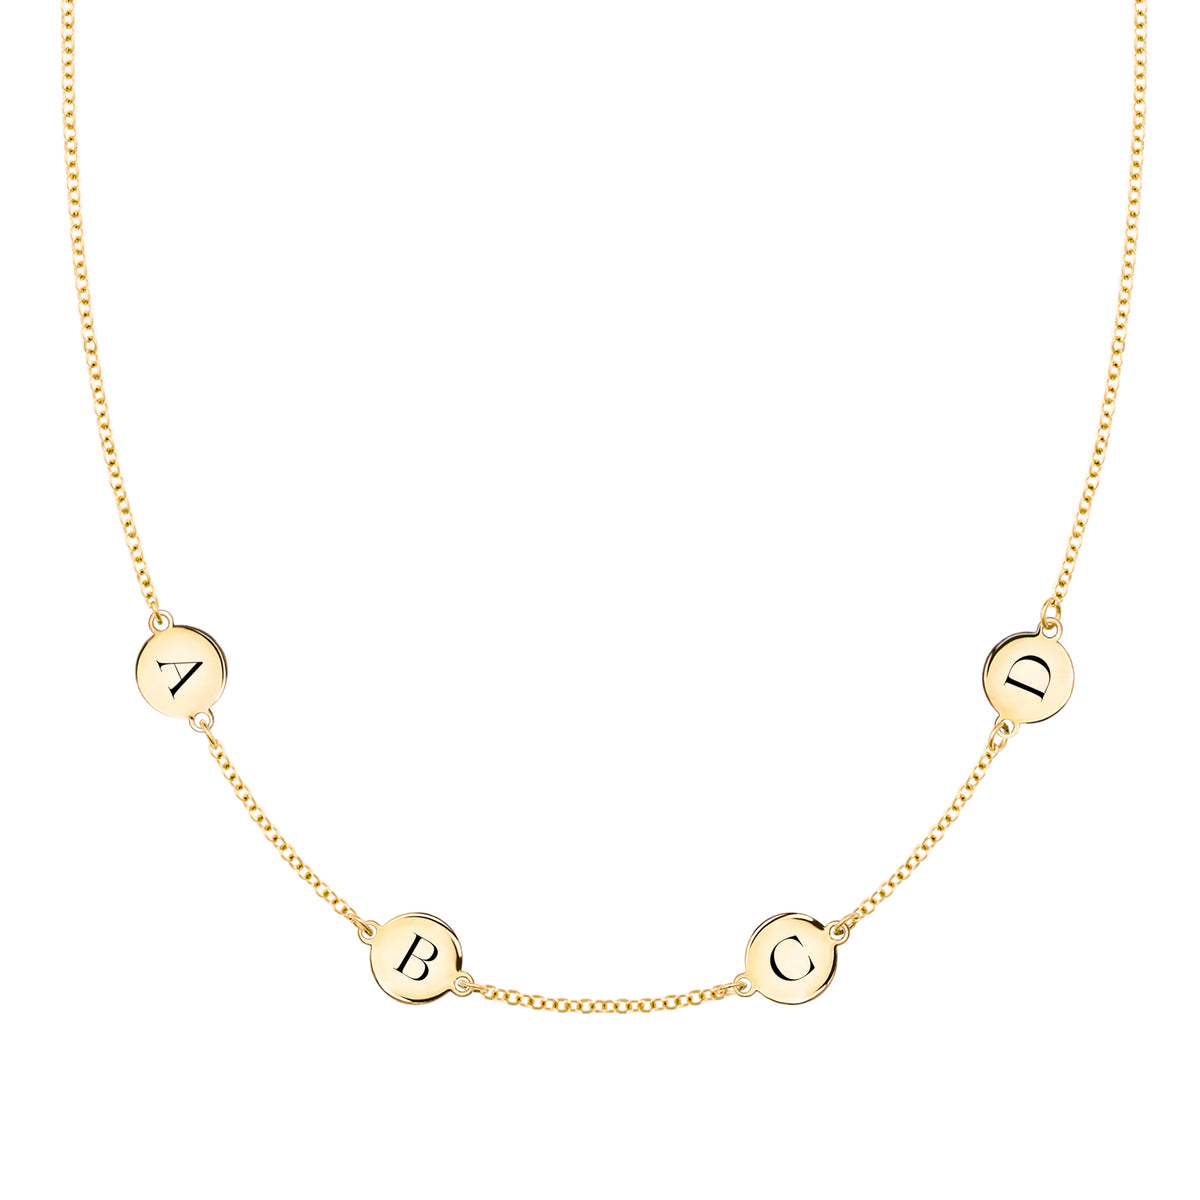 Personalized 4 Letter Necklace in 14k Gold (Double Spacing)